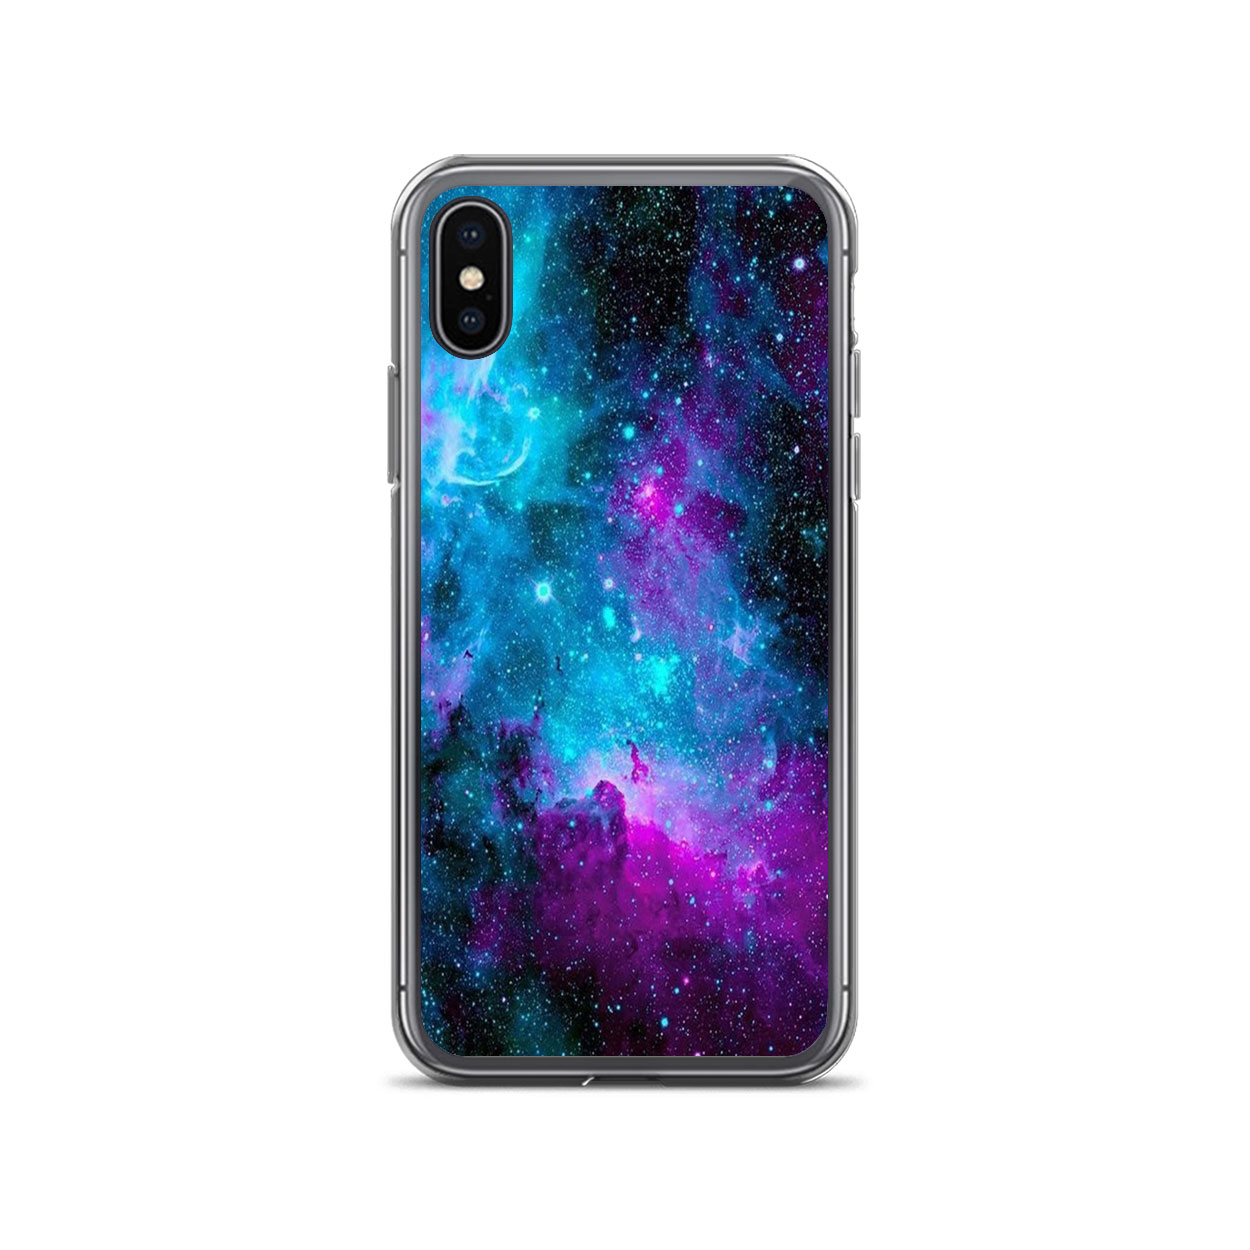 New Galaxy Space Iphone Case For Xs Xs Max Xr X 8 8 Plus 7 7plus 6 6s